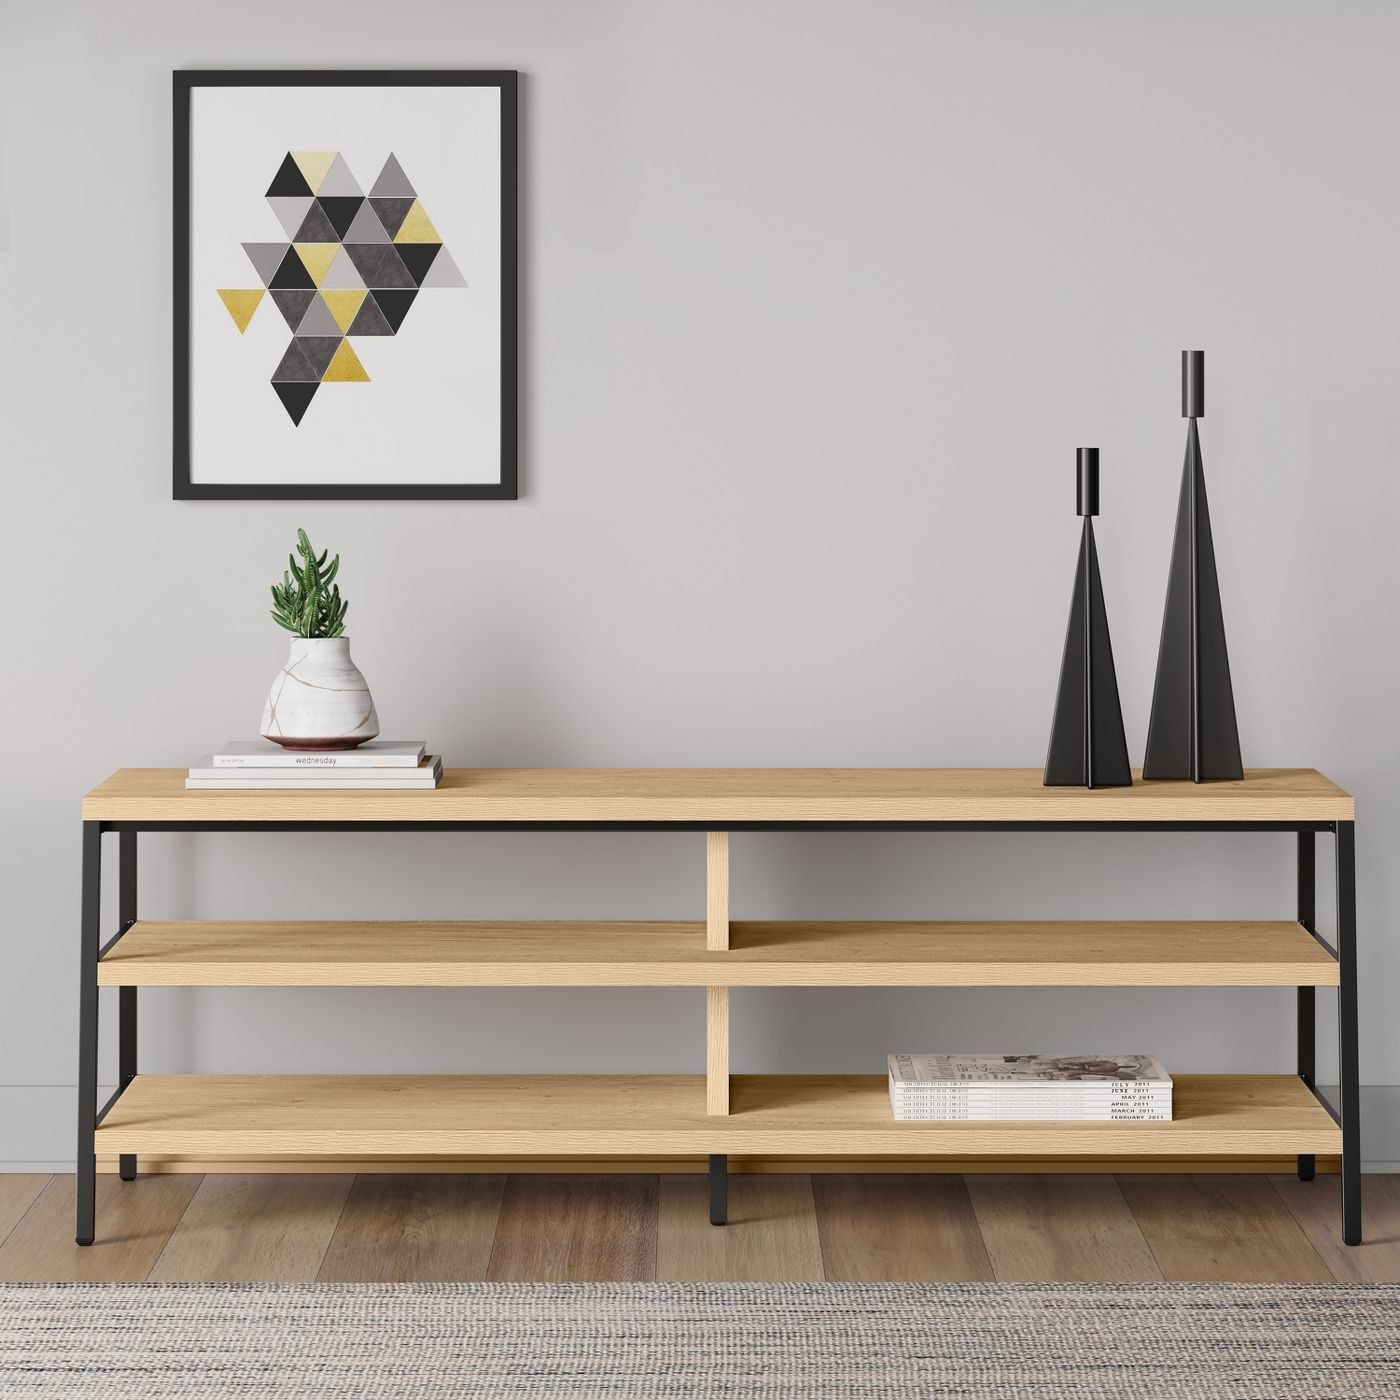 A natural wood TV stand with metal legs